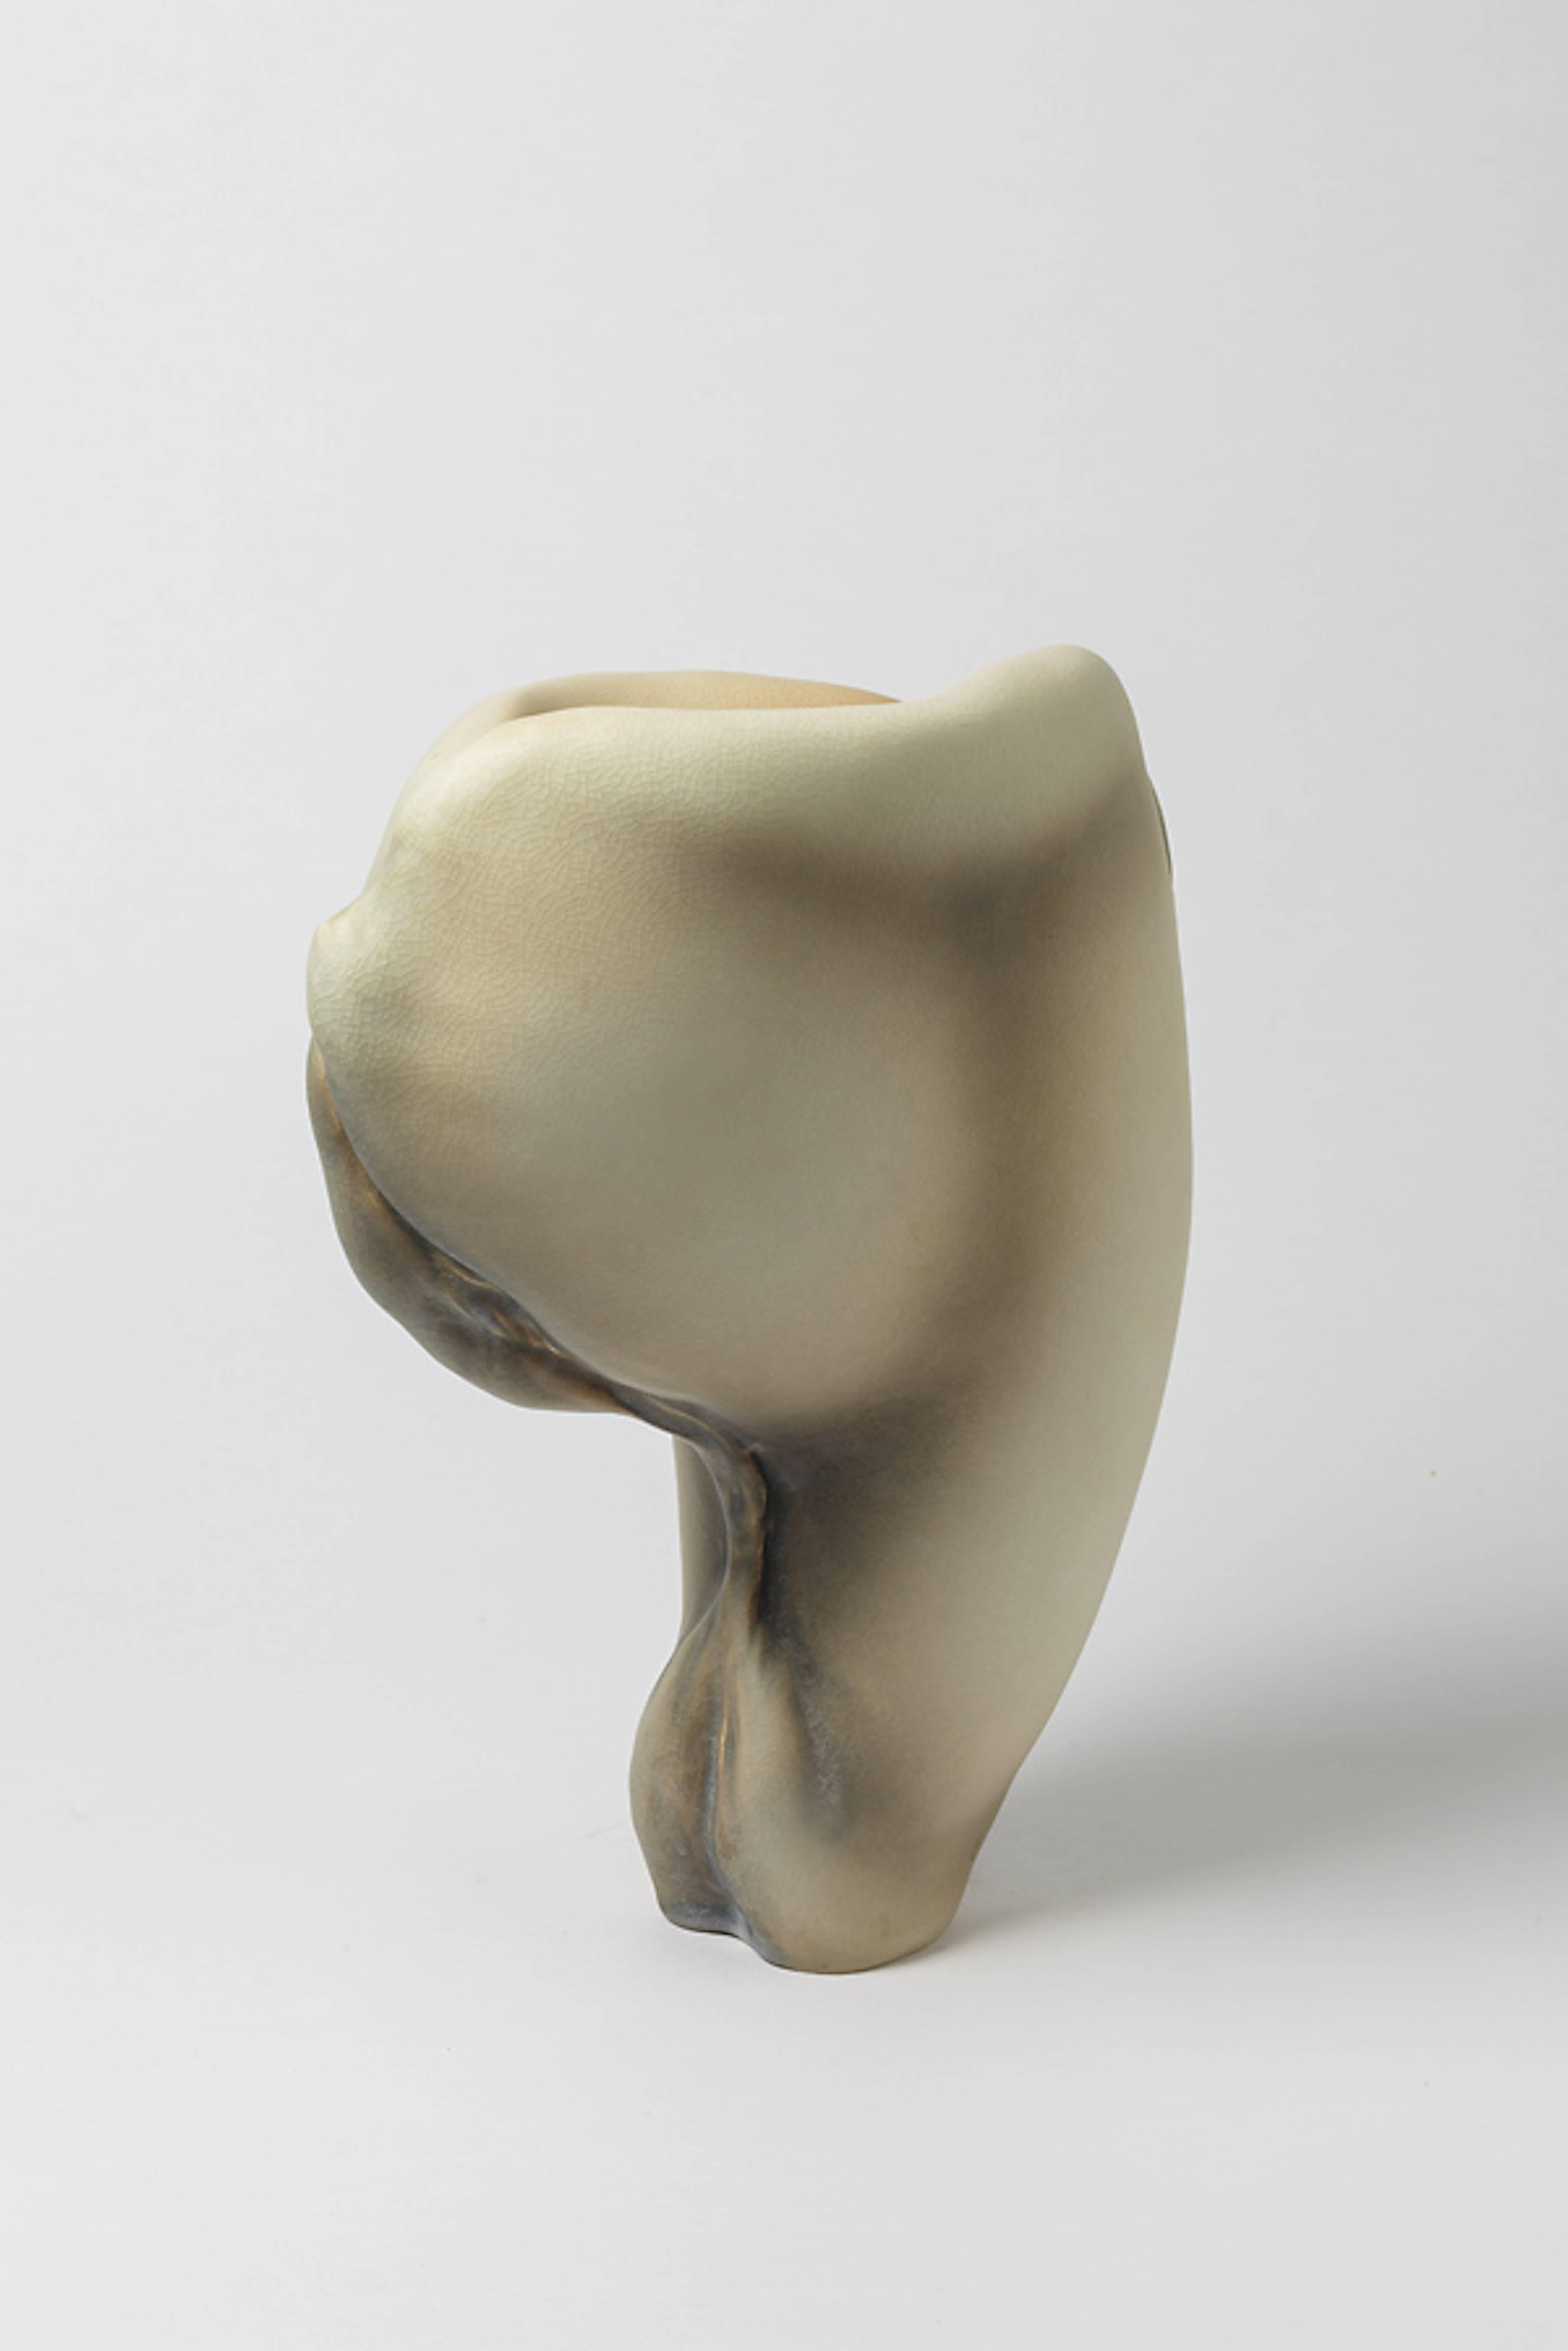 Contemporary Porcelain Sculpture by Wayne Fischer, French-American, circa 2016